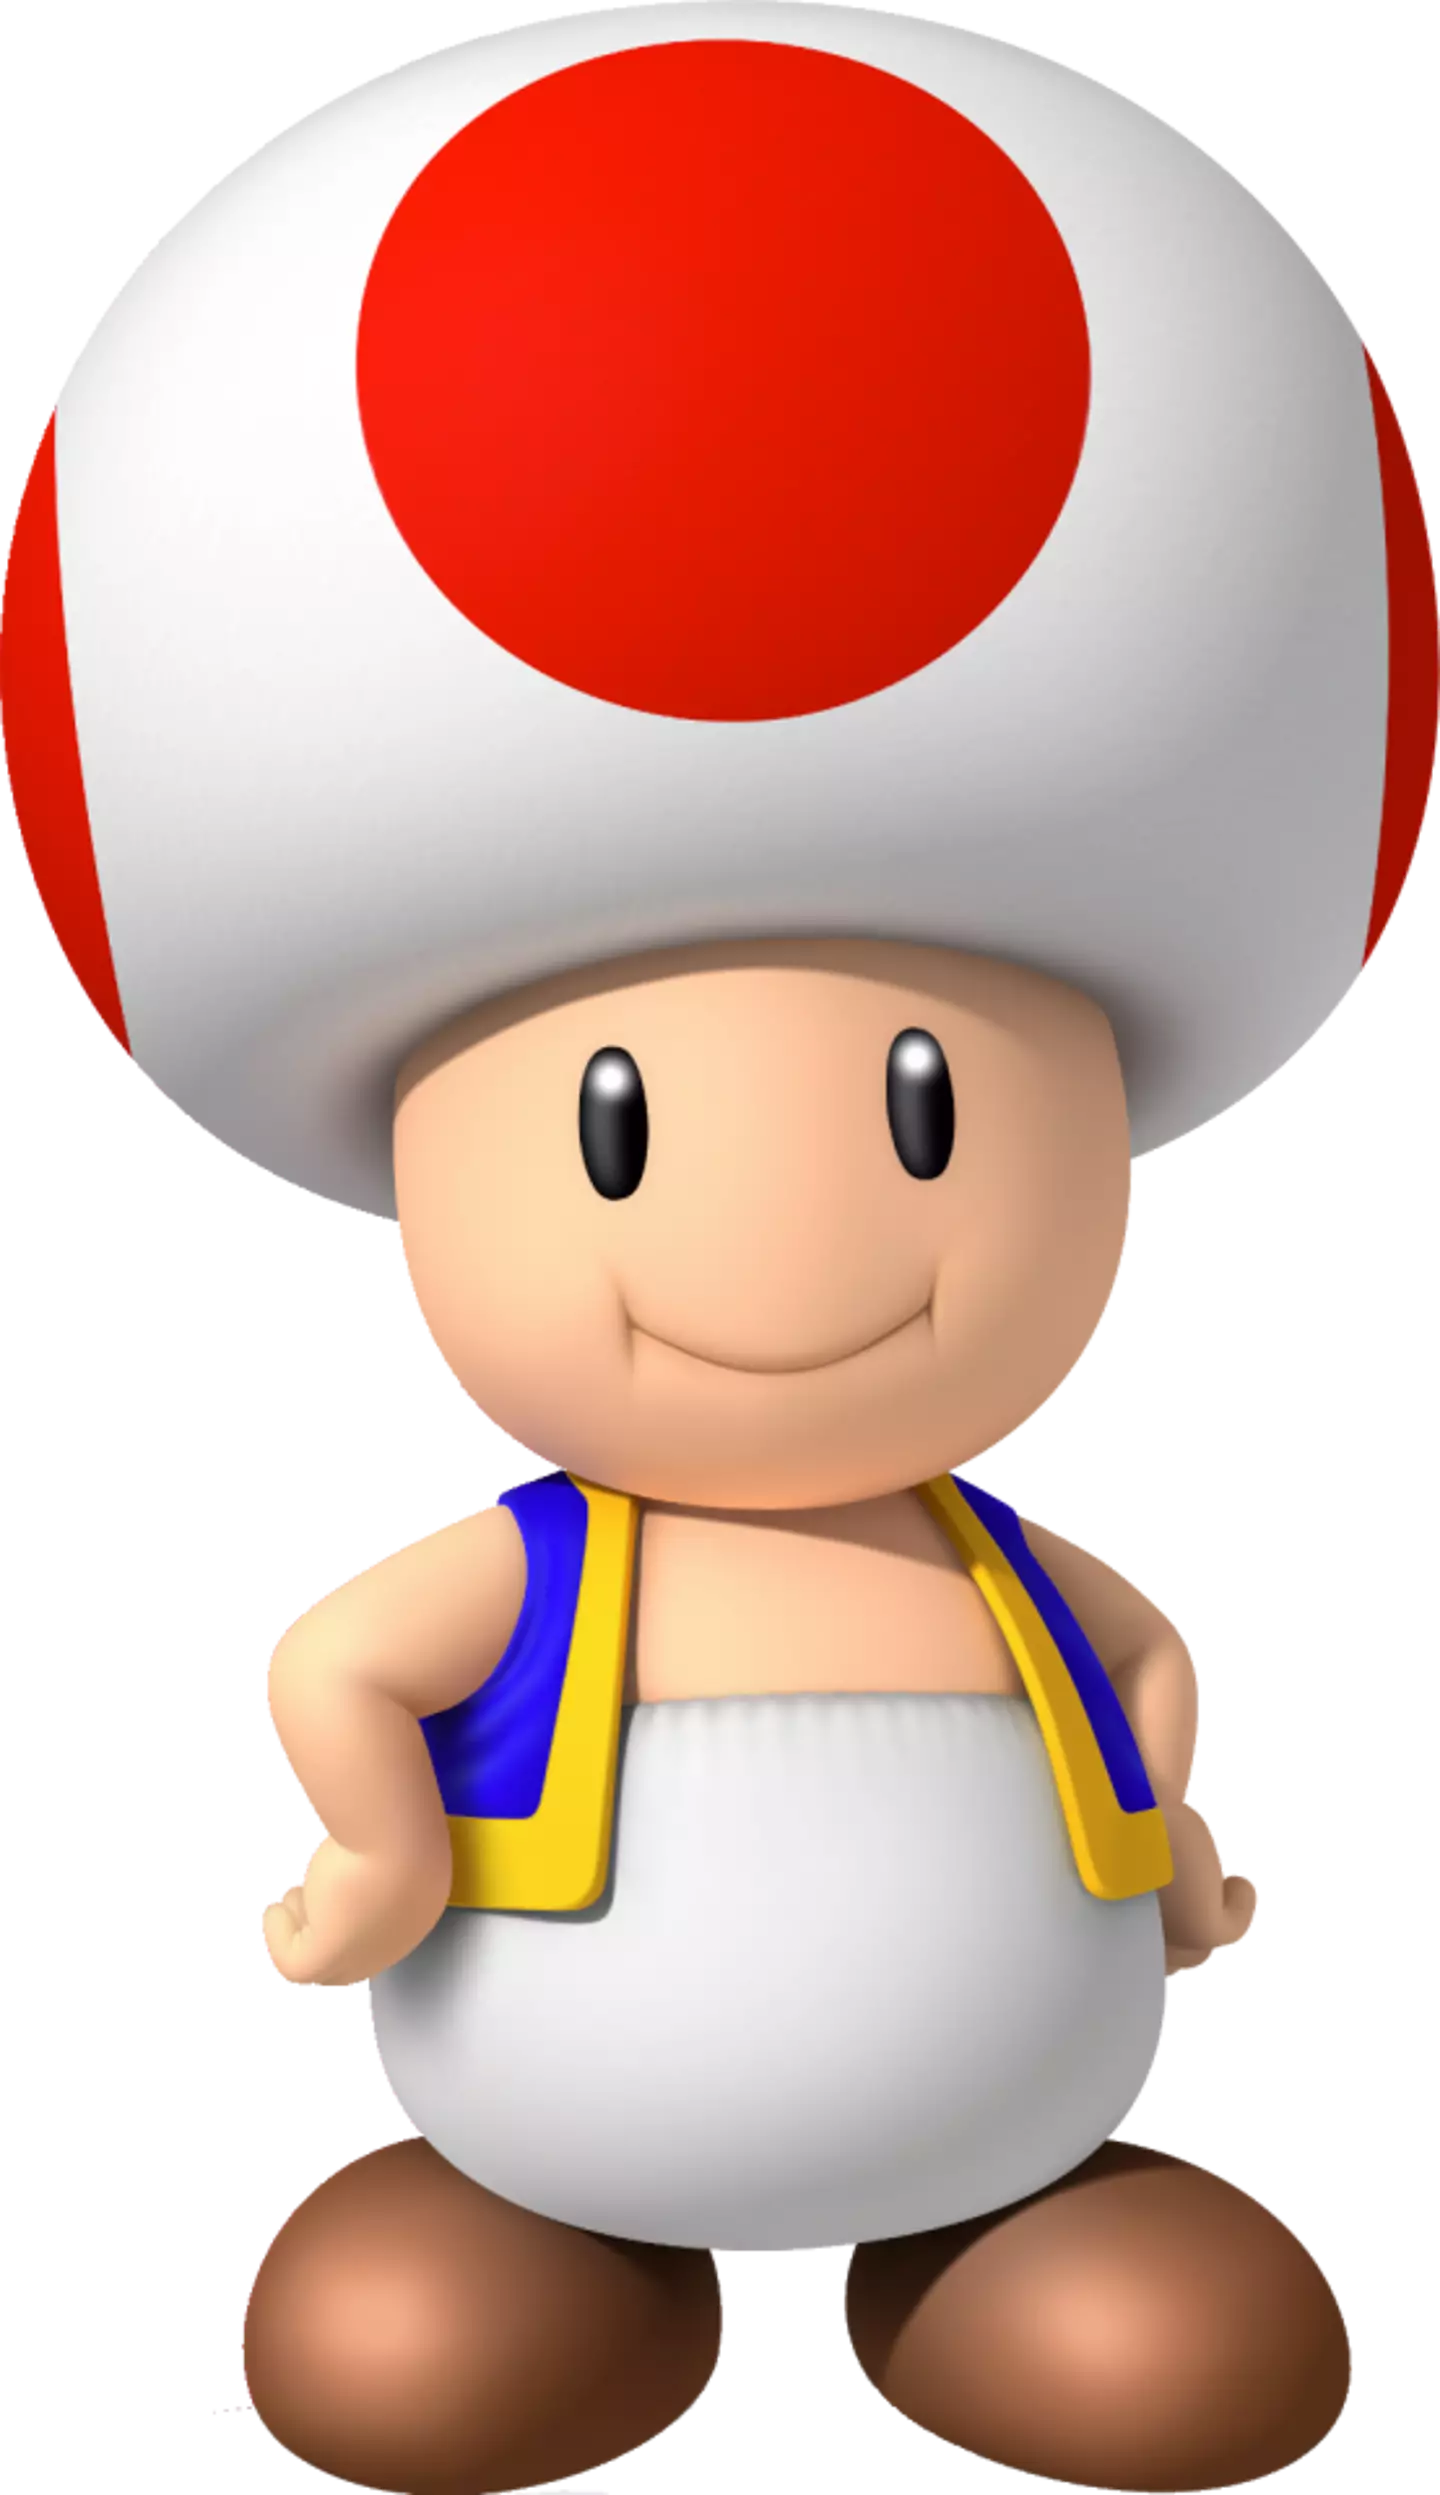 He's even been compared to Toad.